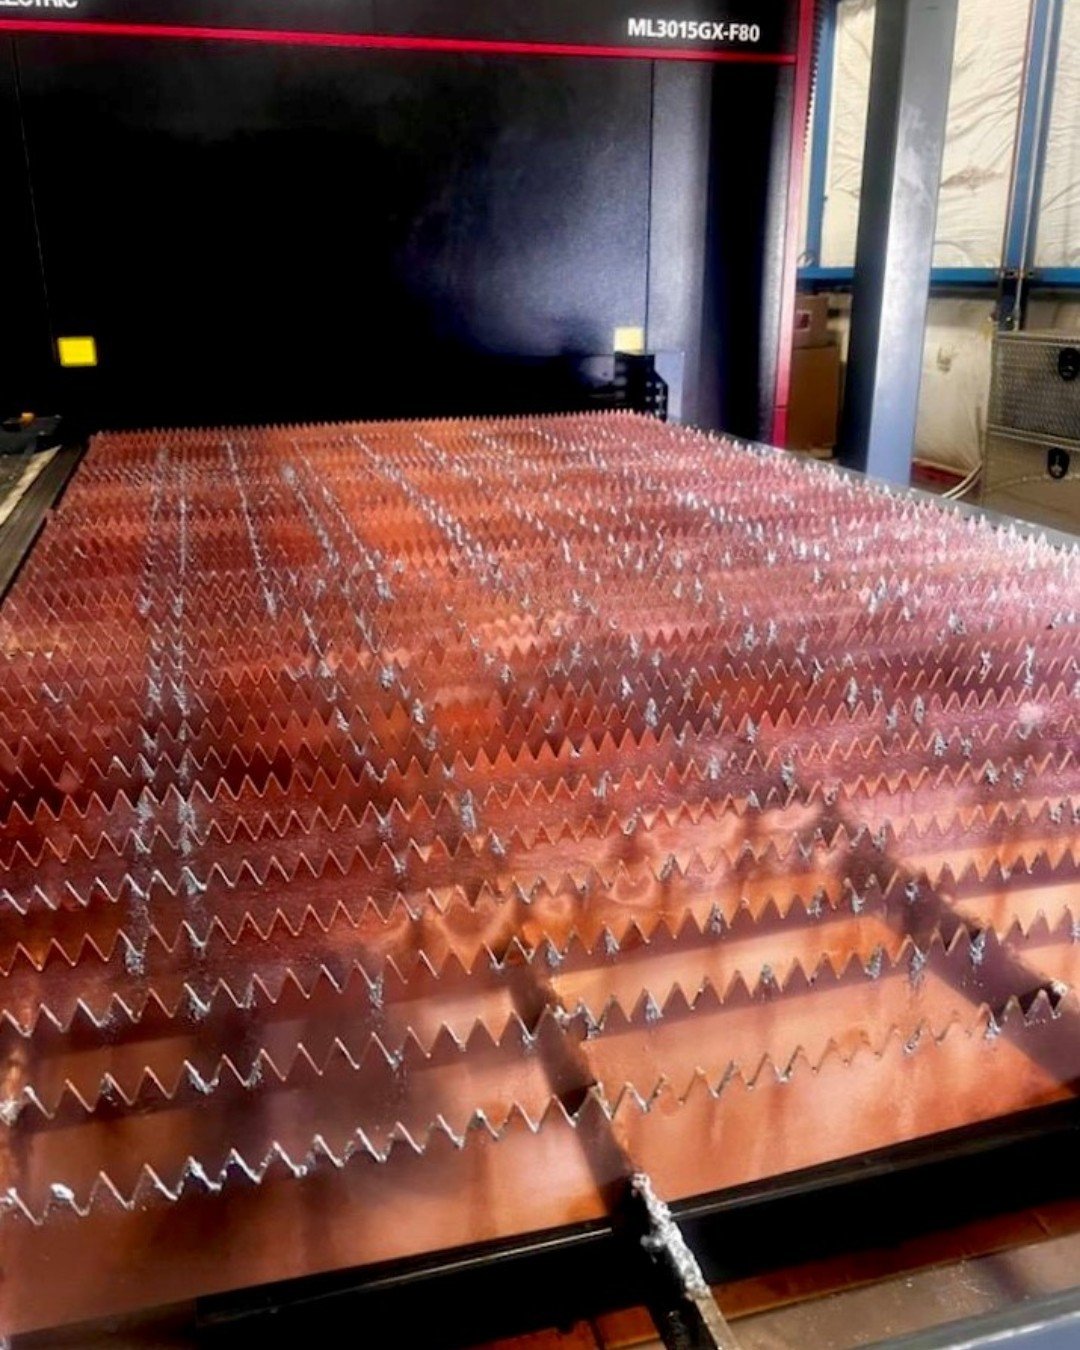 Whoever said the streets are paved in gold, surely meant paved in copper. 😎 

Our laser bed just got an upgrade with quality grating, manufactured here in the US. 🇺🇸